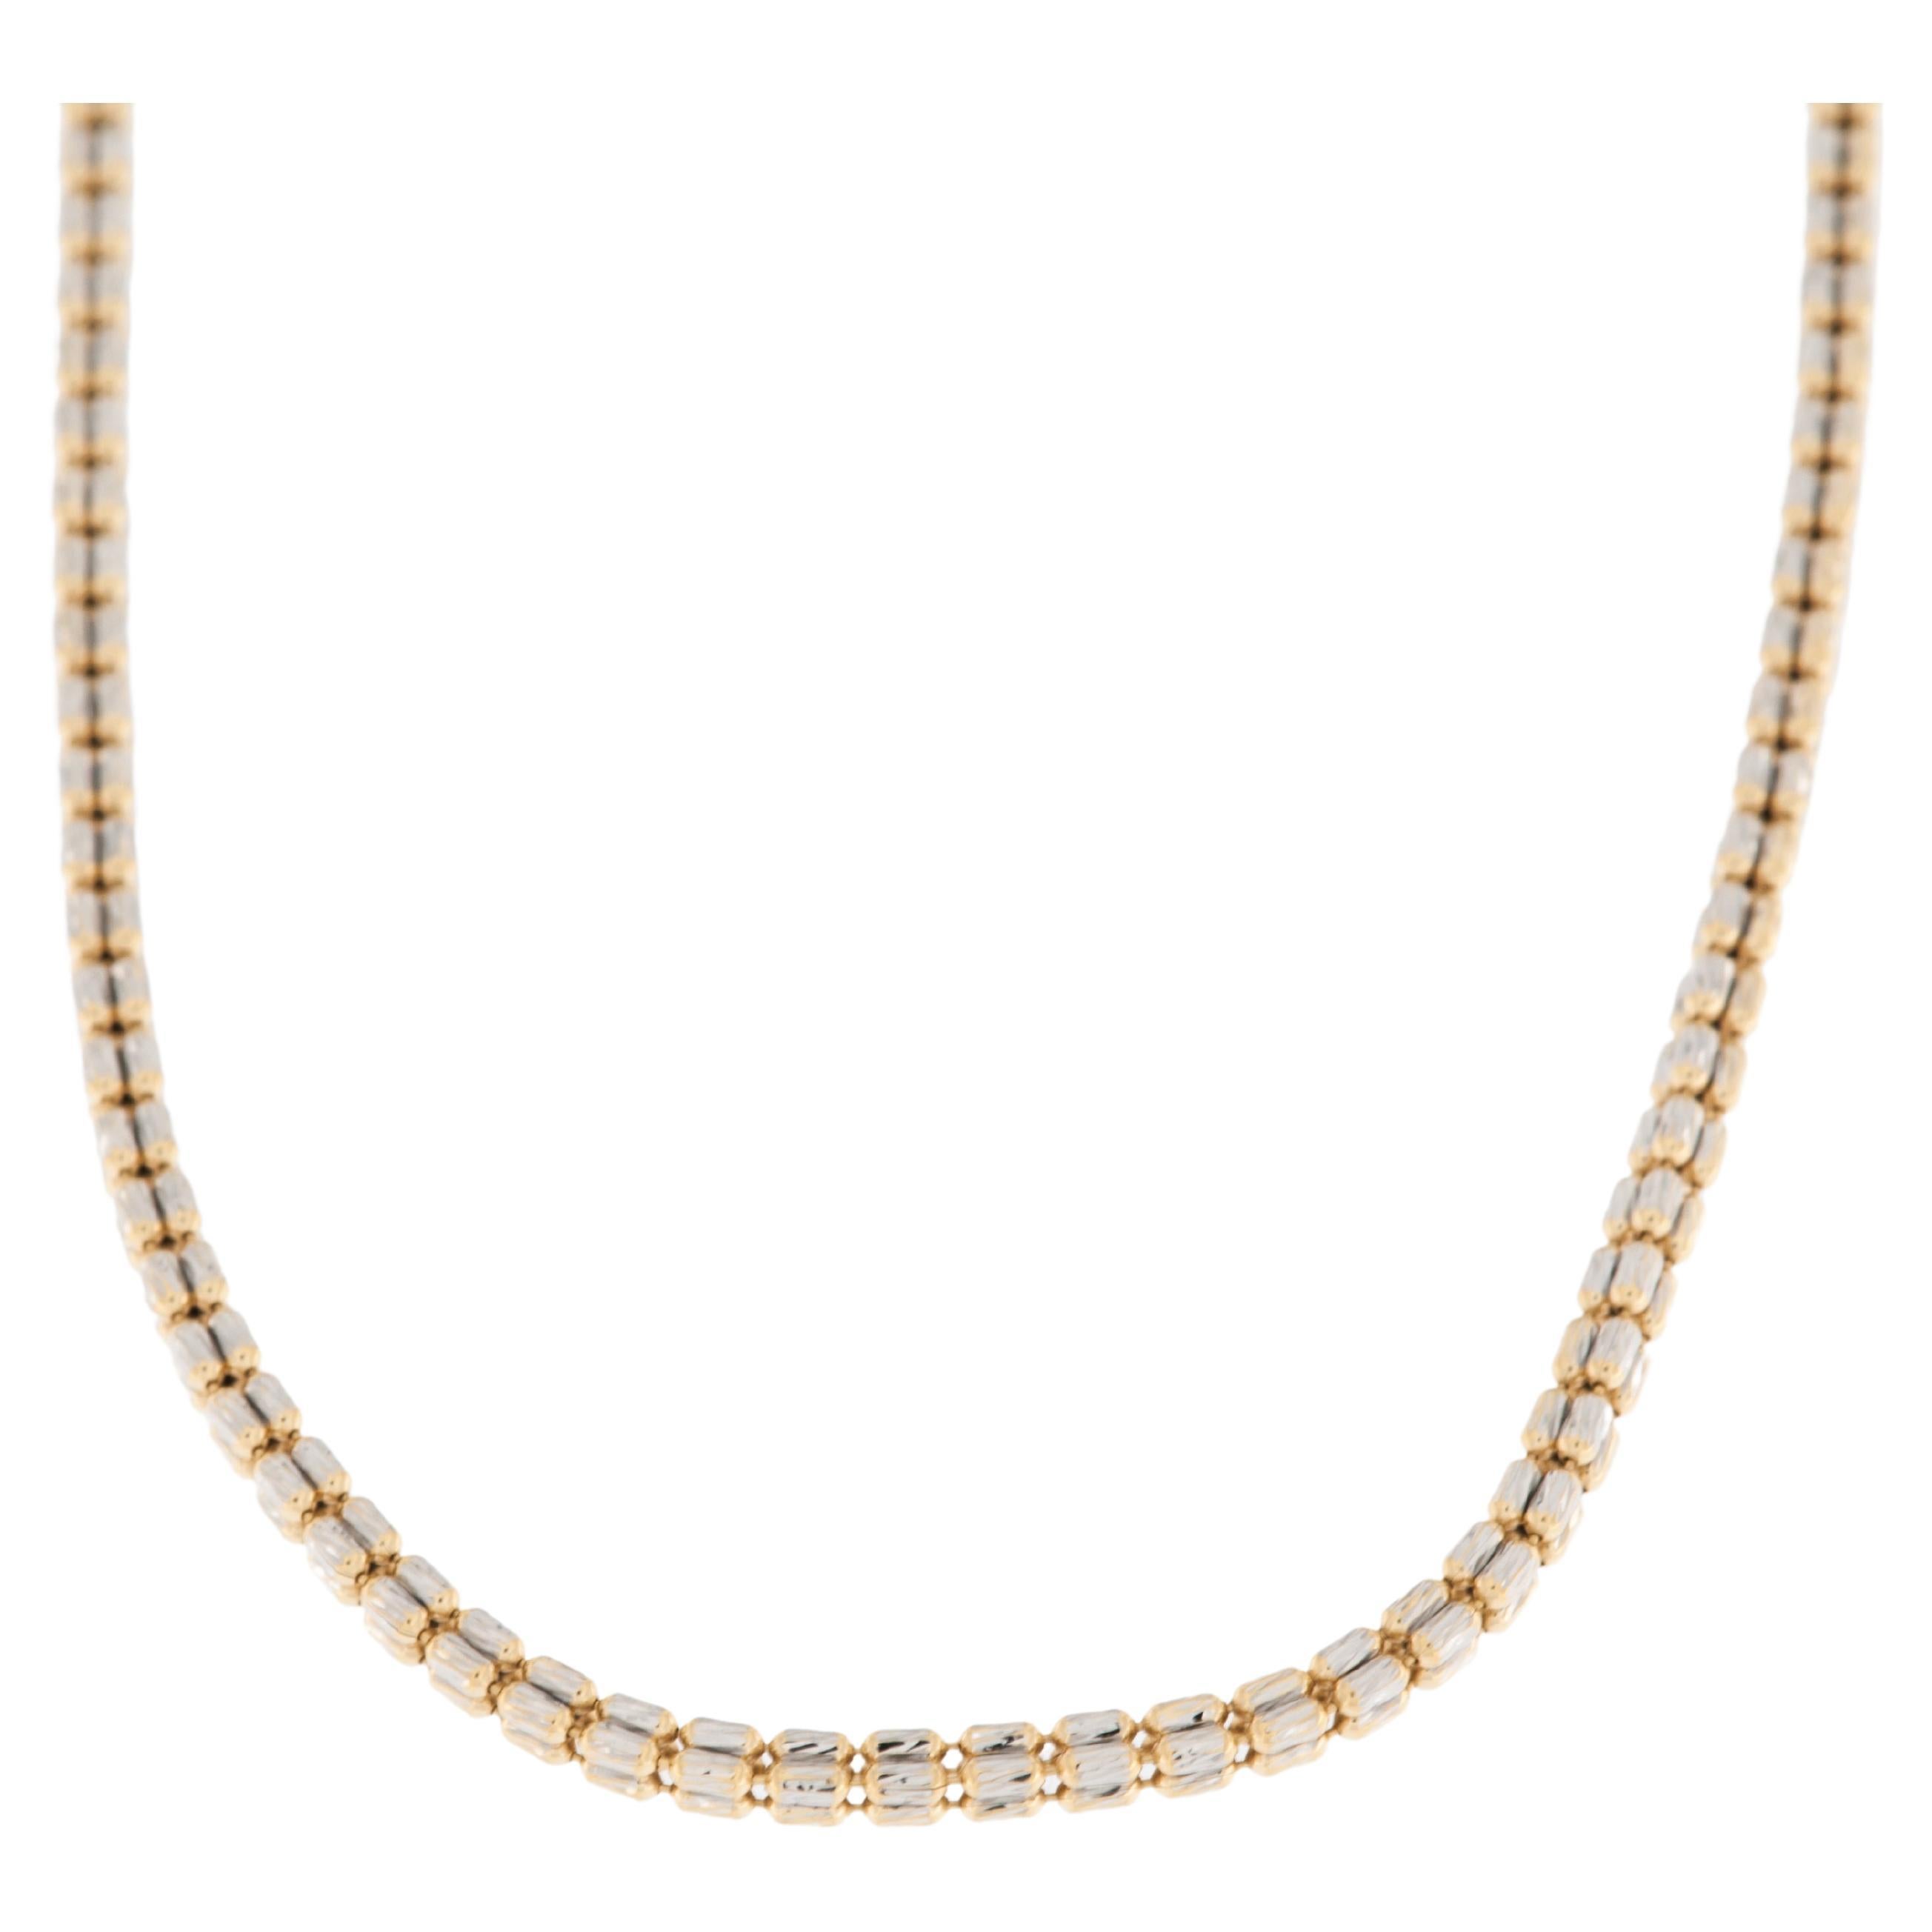 Swiss Vintage 18kt Yellow and White Gold Necklace